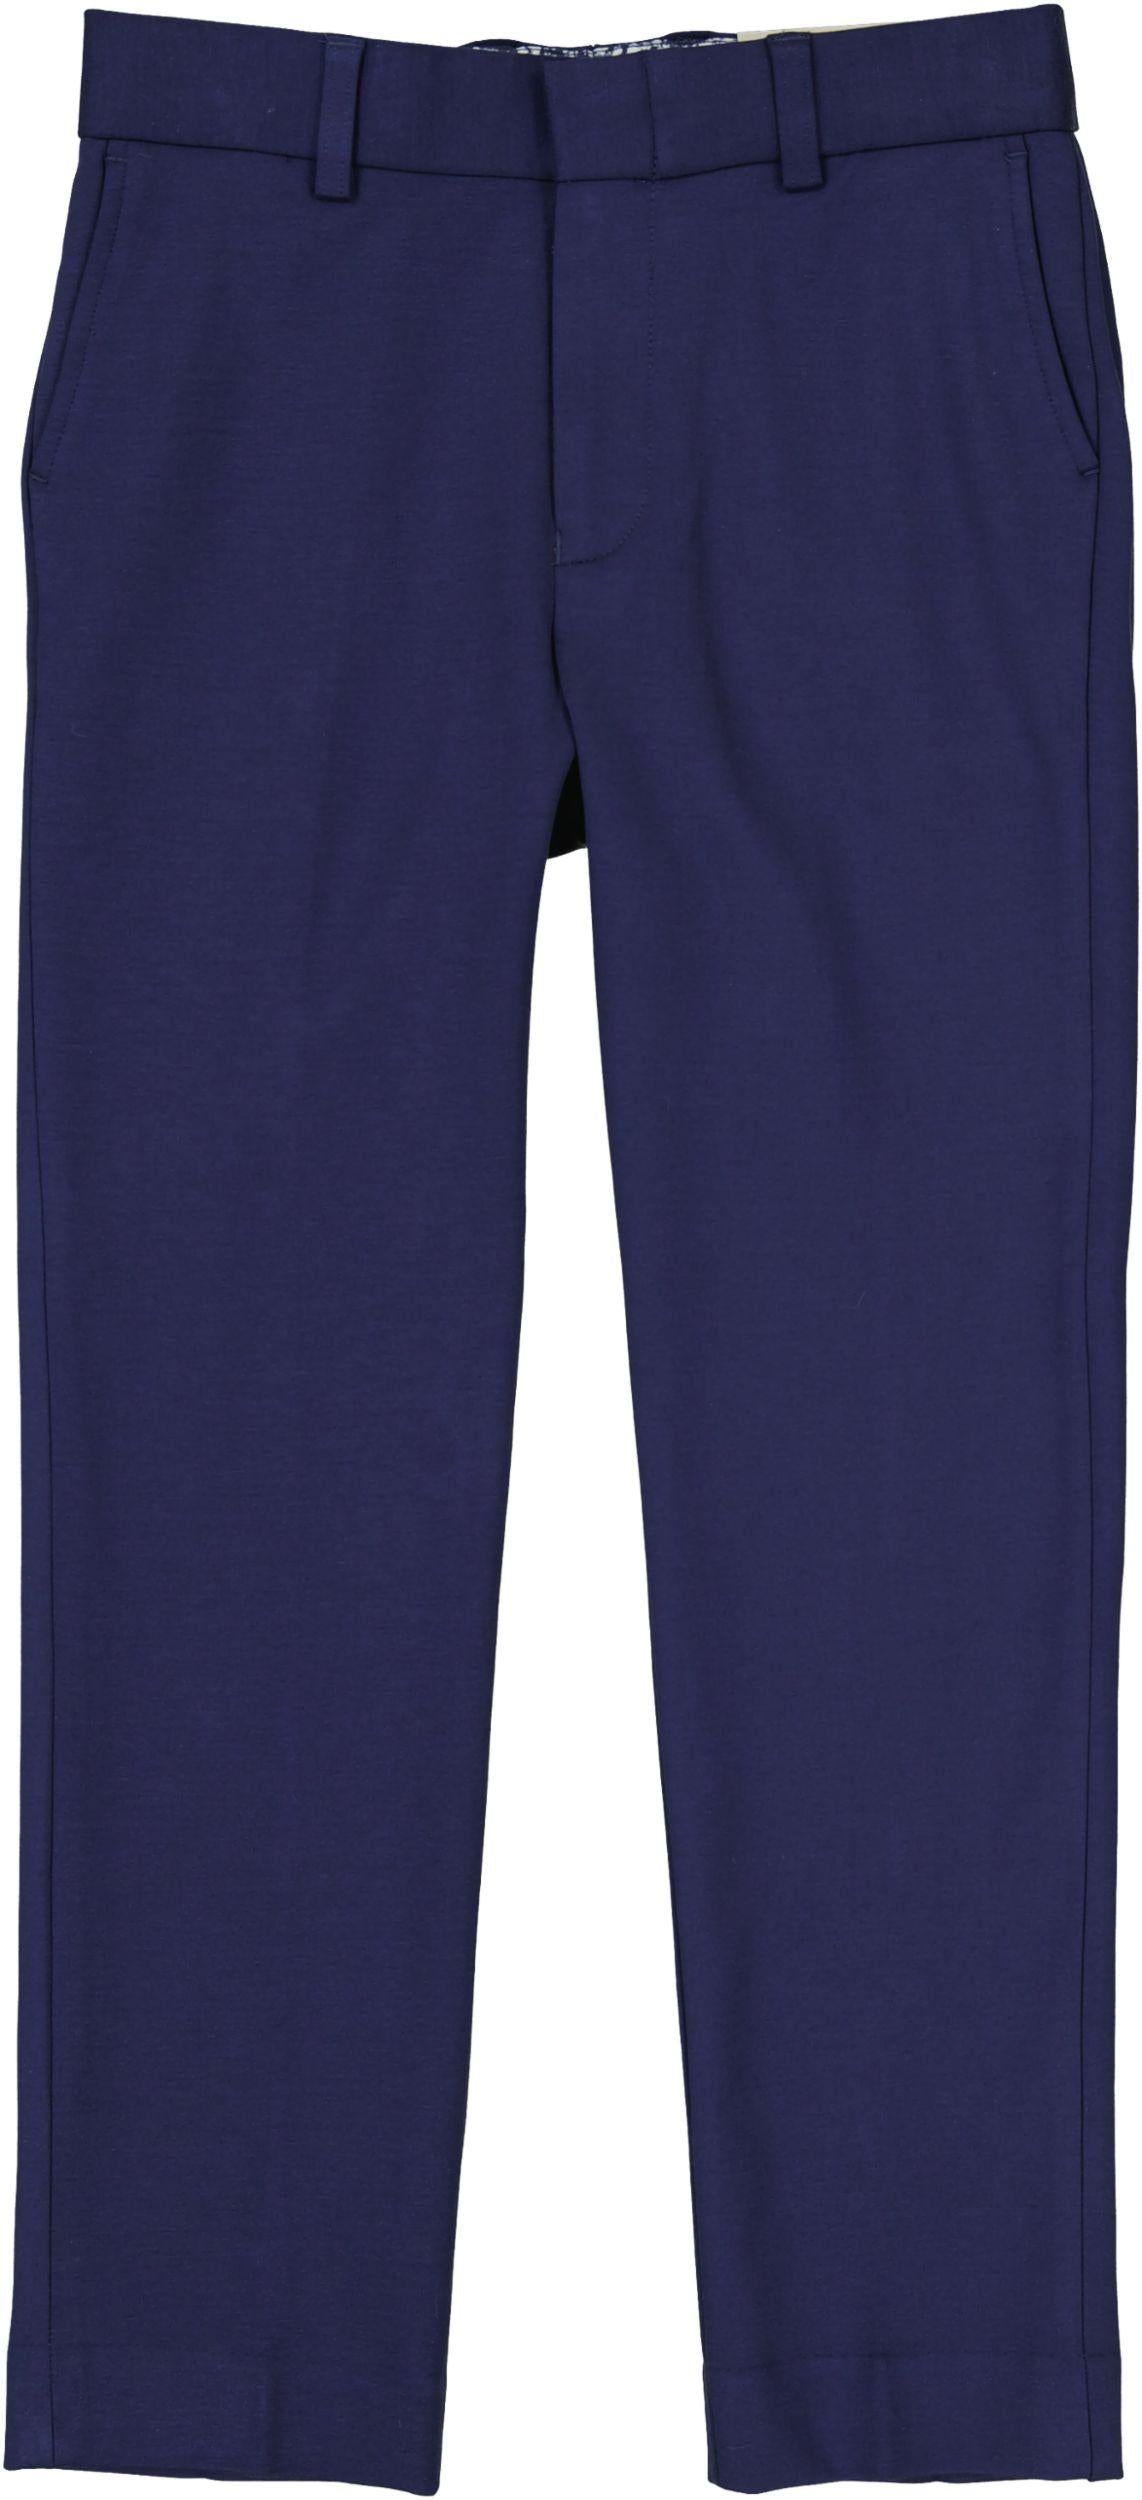 T.O. Collection Boys Blue Soho Stretch Suit Separates - 9131-31